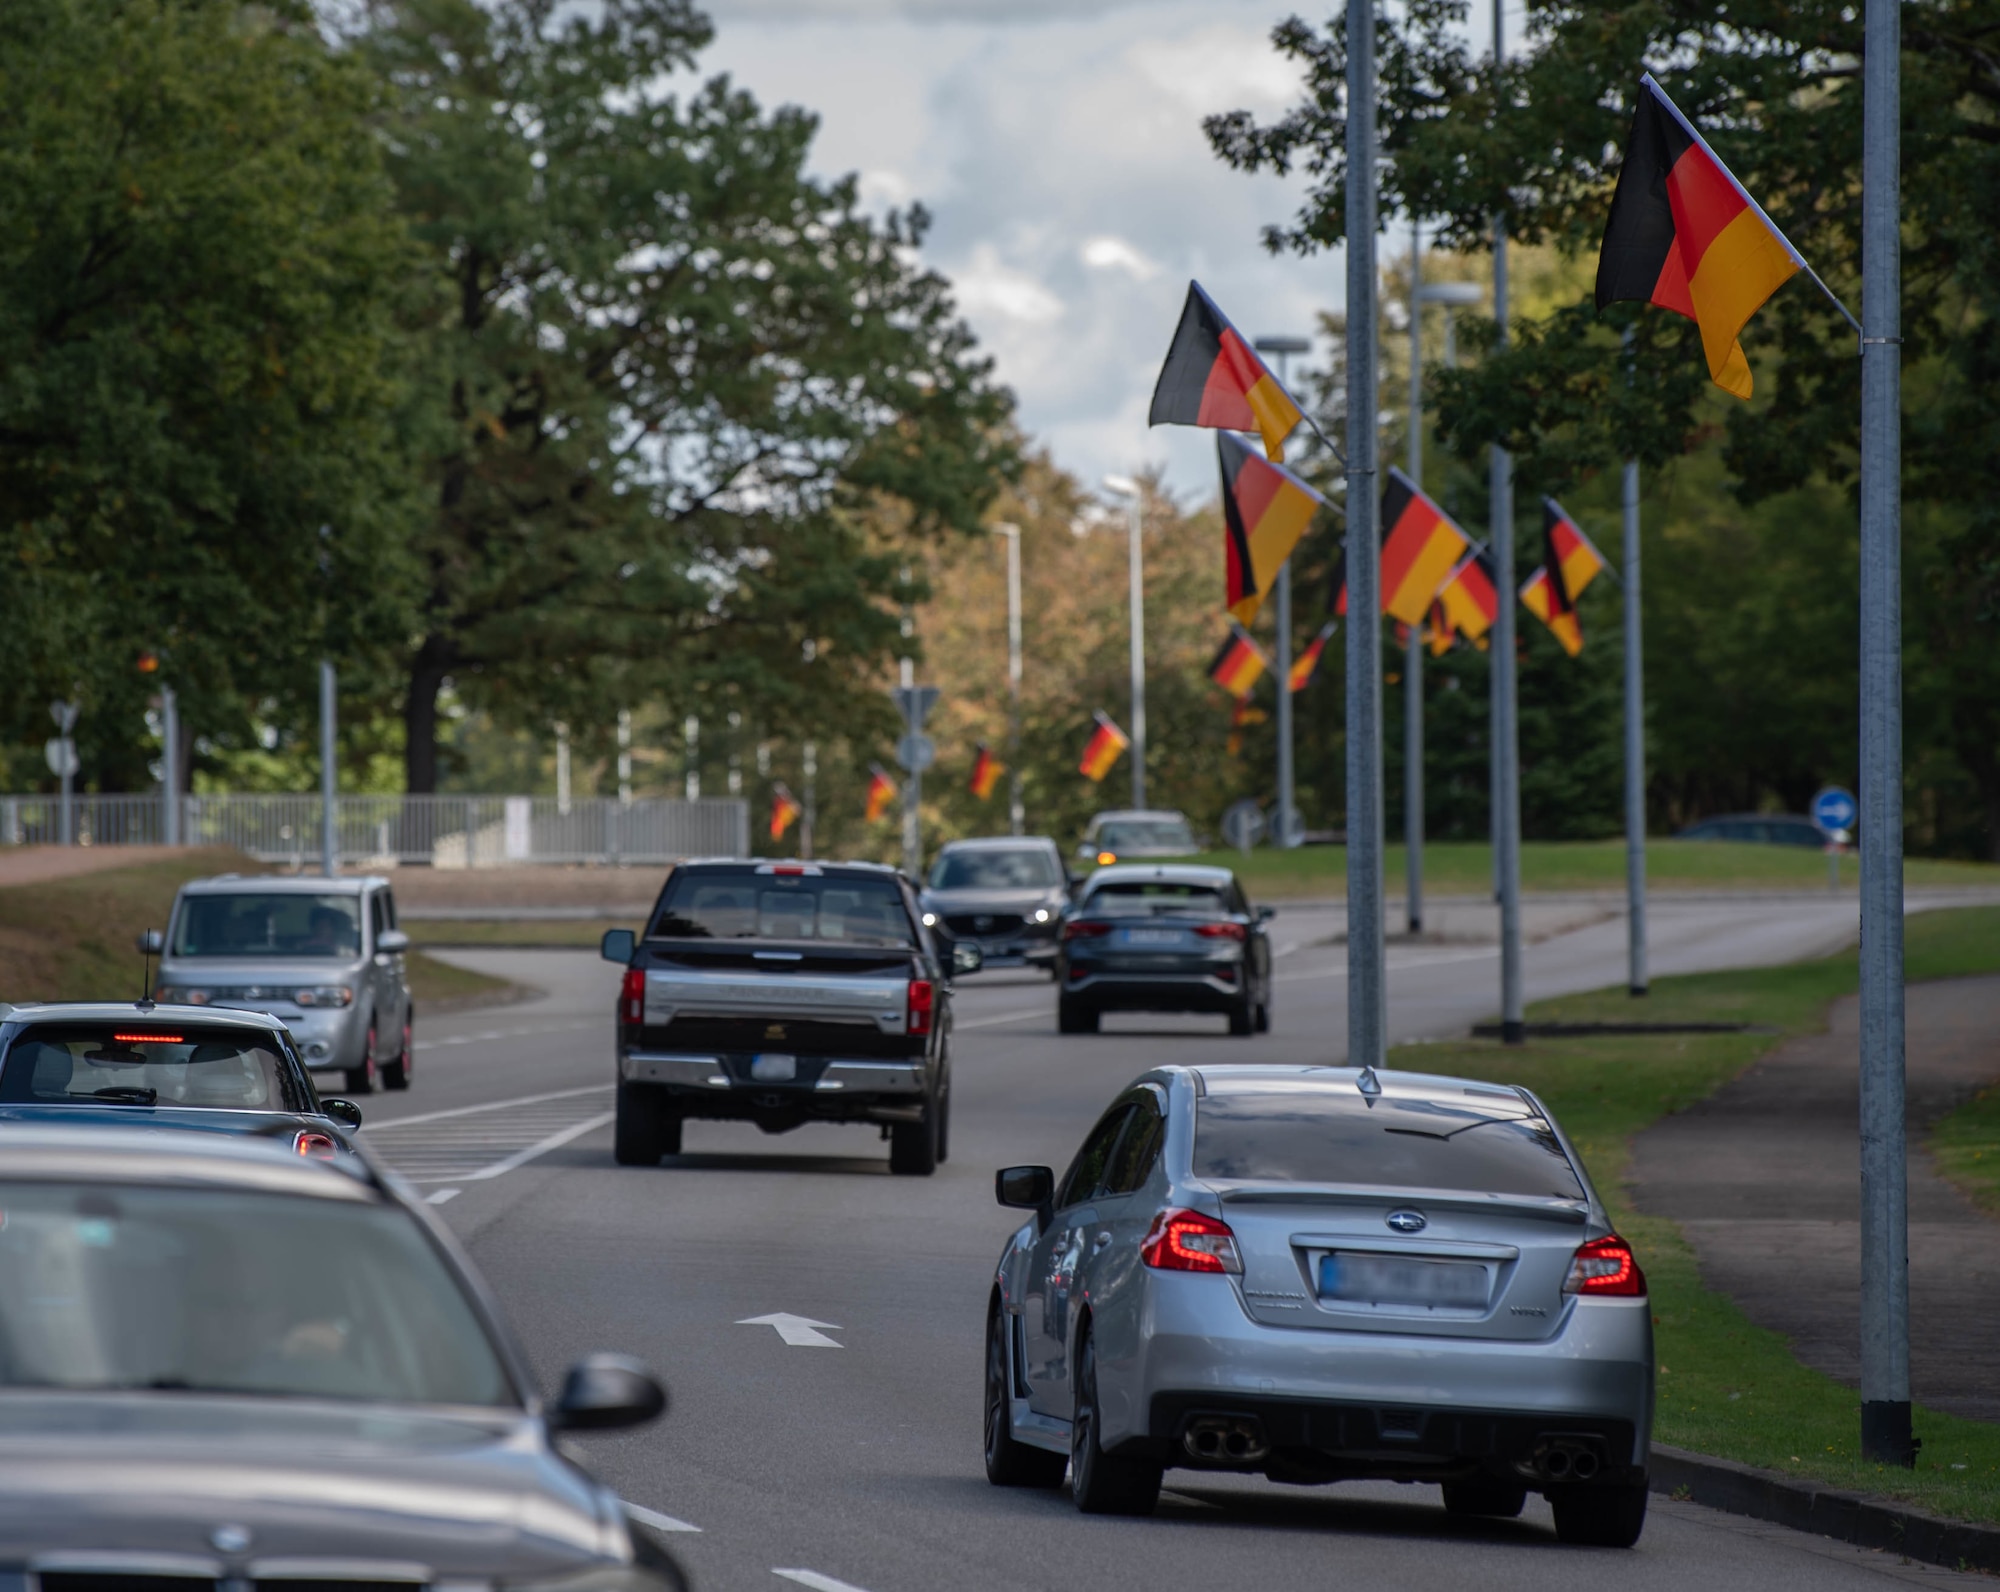 Vehicles drive by German flags along Kisling Memorial Drive at Ramstein Air Base, Germany, Sept. 30, 2021.